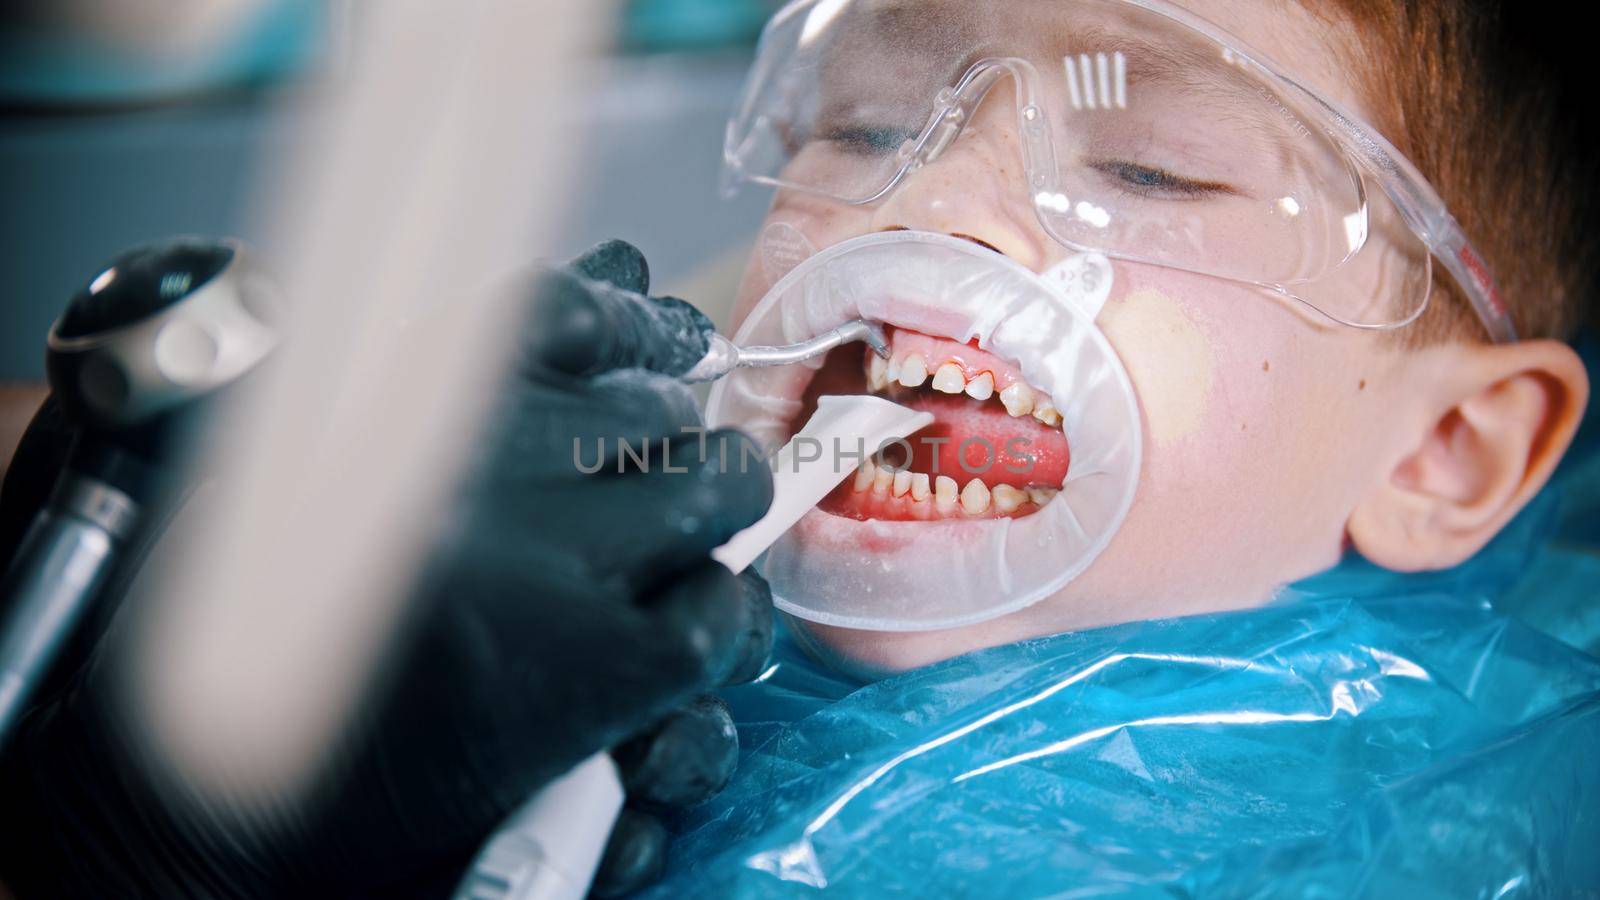 A little boy having a cleaning treatment in the modern dentistry. Mid shot